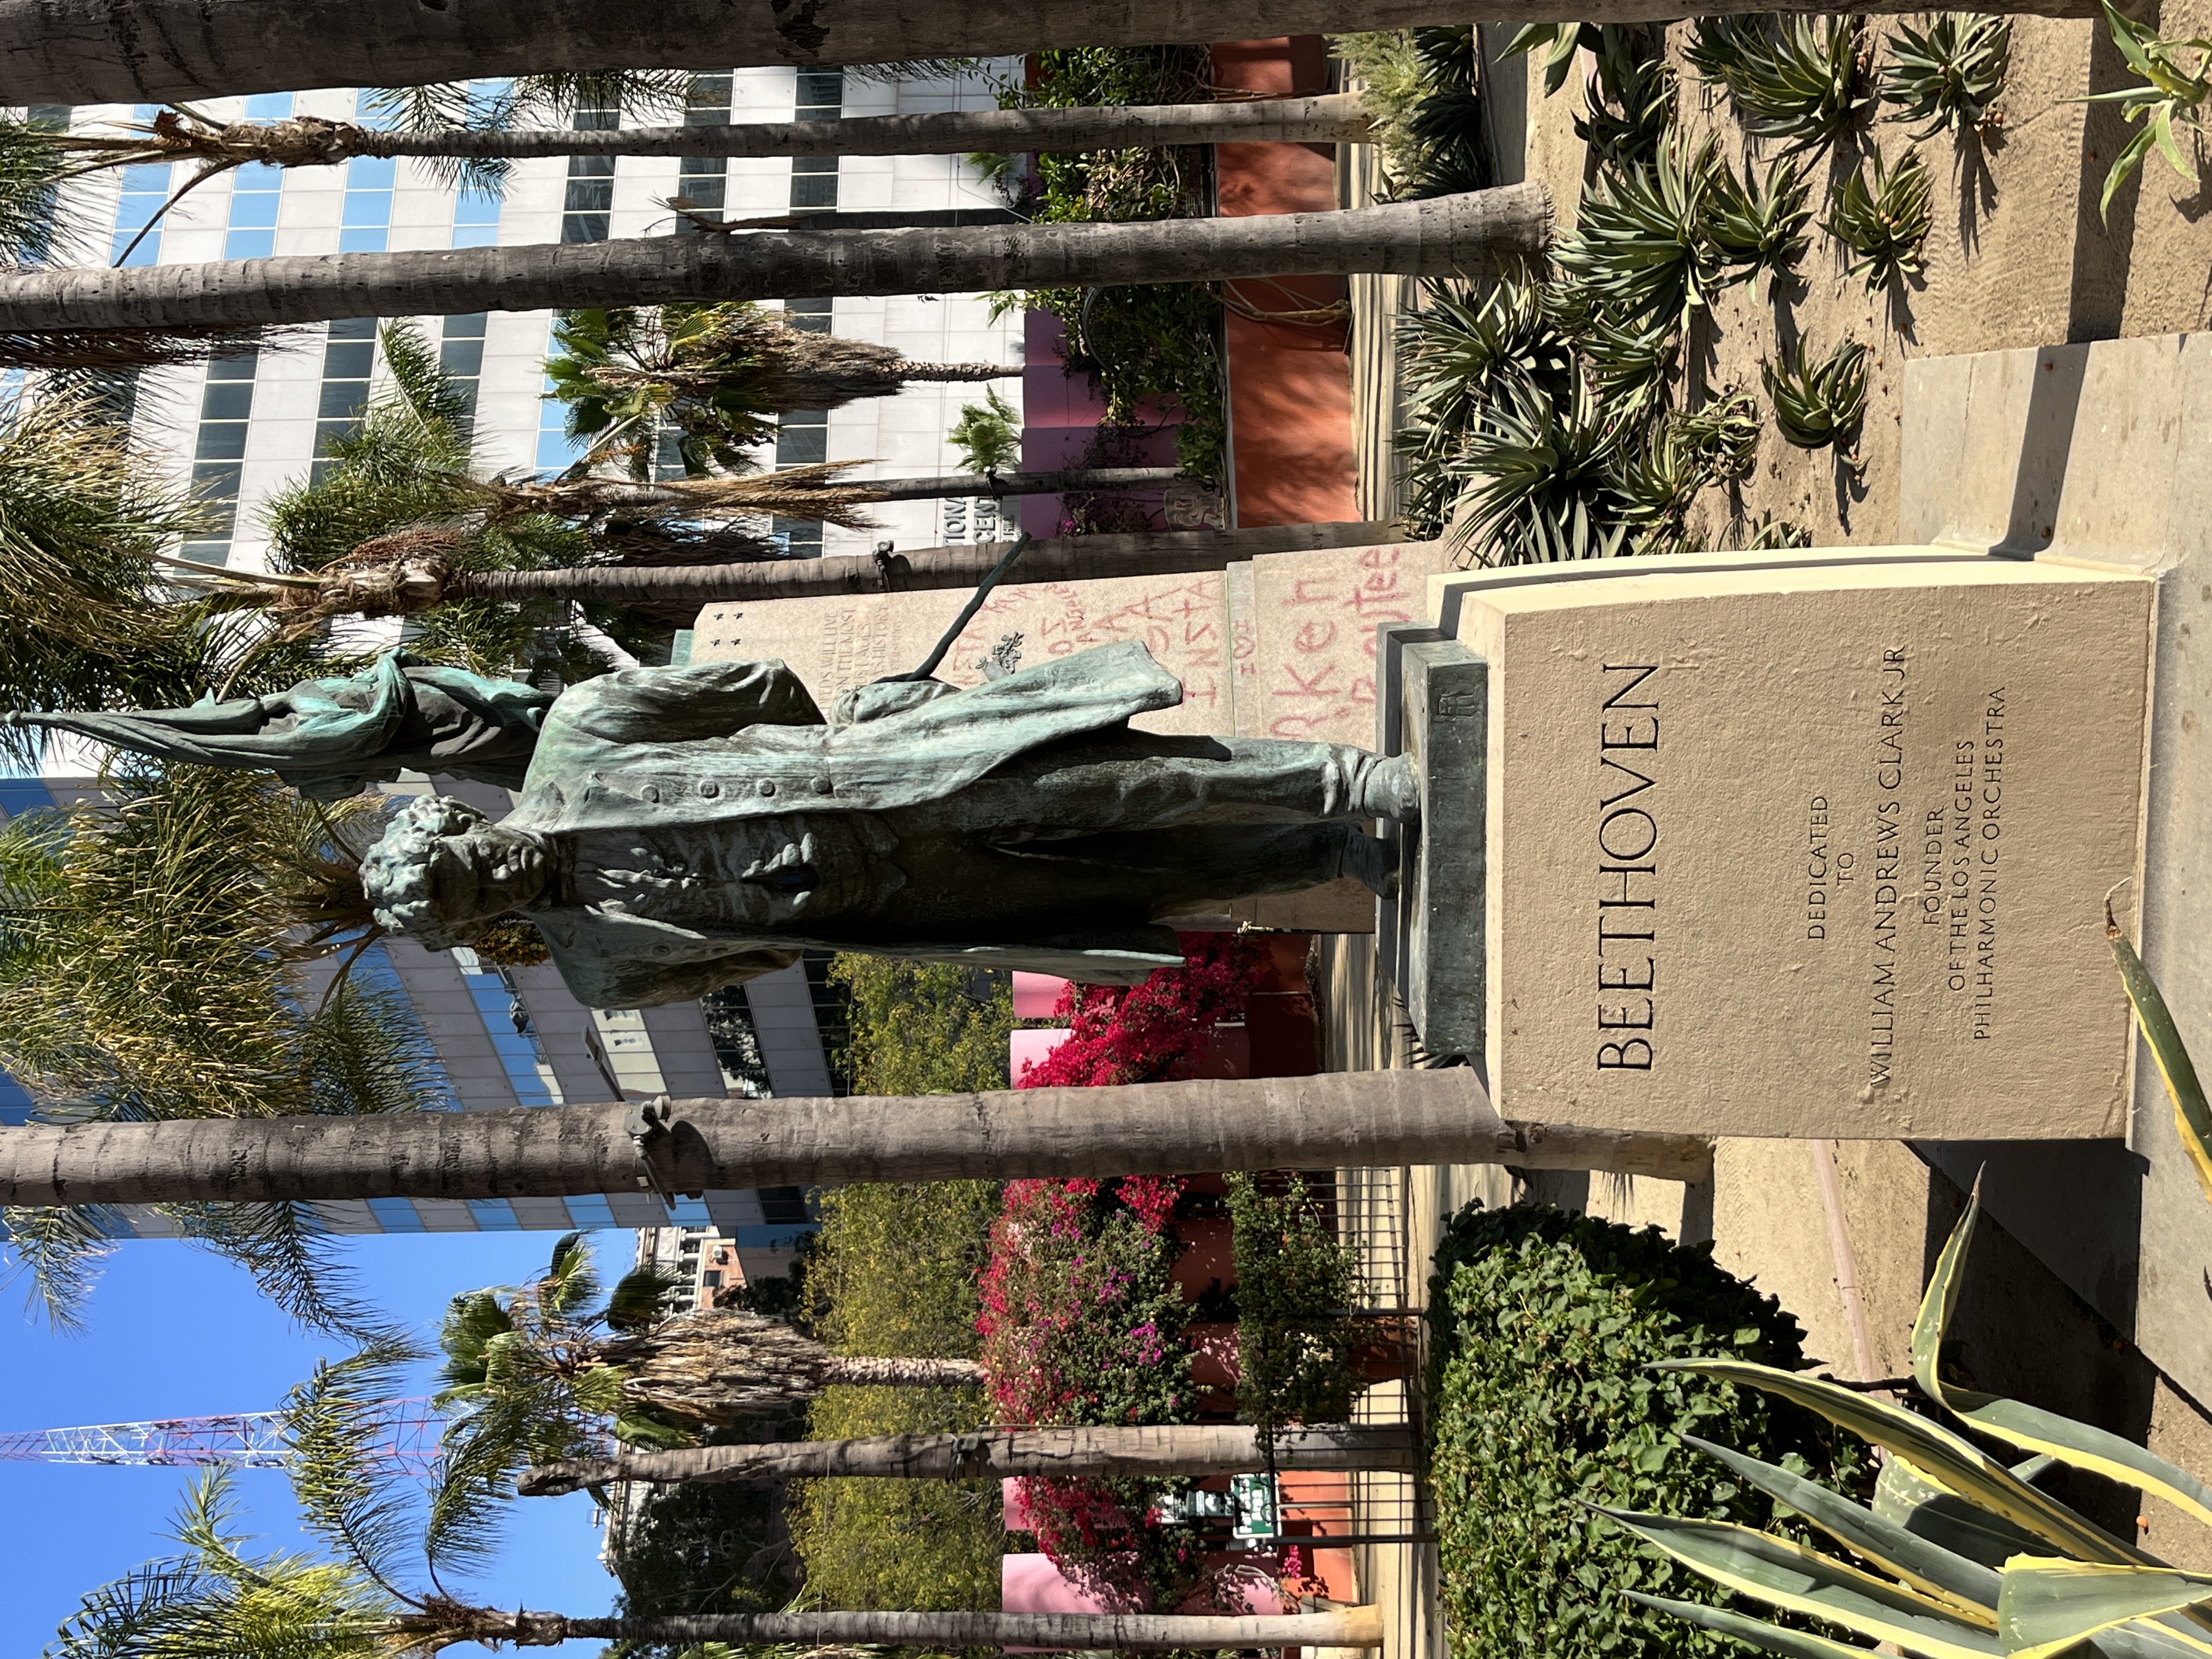 Monument_to_Beethoven_%28Pershing_Square%2C_Los_Angeles%29_July_2022.JPG